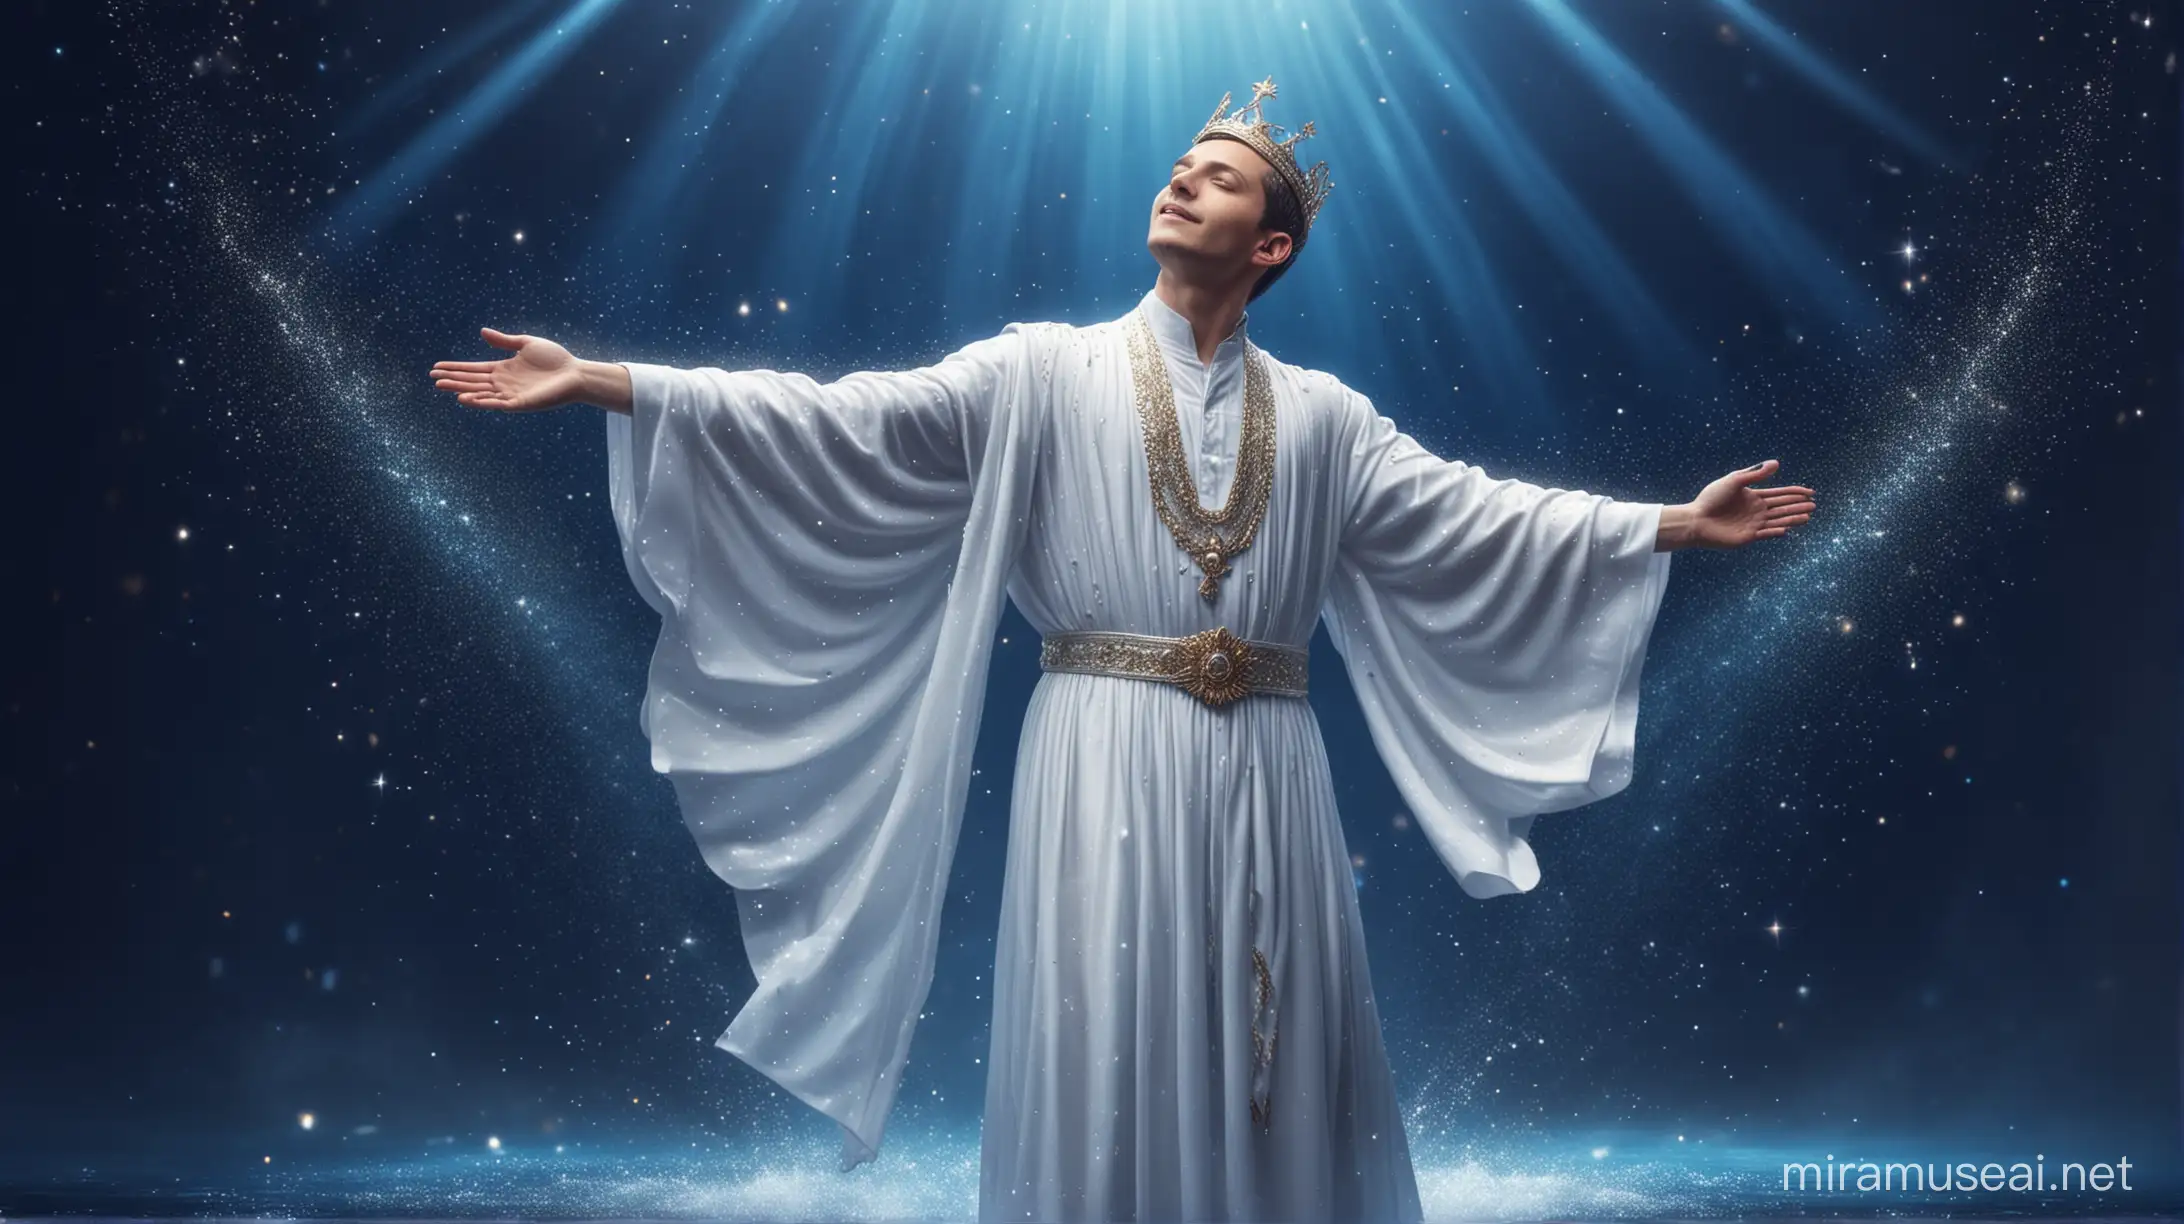 Realistic image: Royal blue background. Rays of light. Multidimensional water. Waterfall. Stardust and glitter in the air. Praise dancing young man in white with white robe and crown on his head. Pigeon.